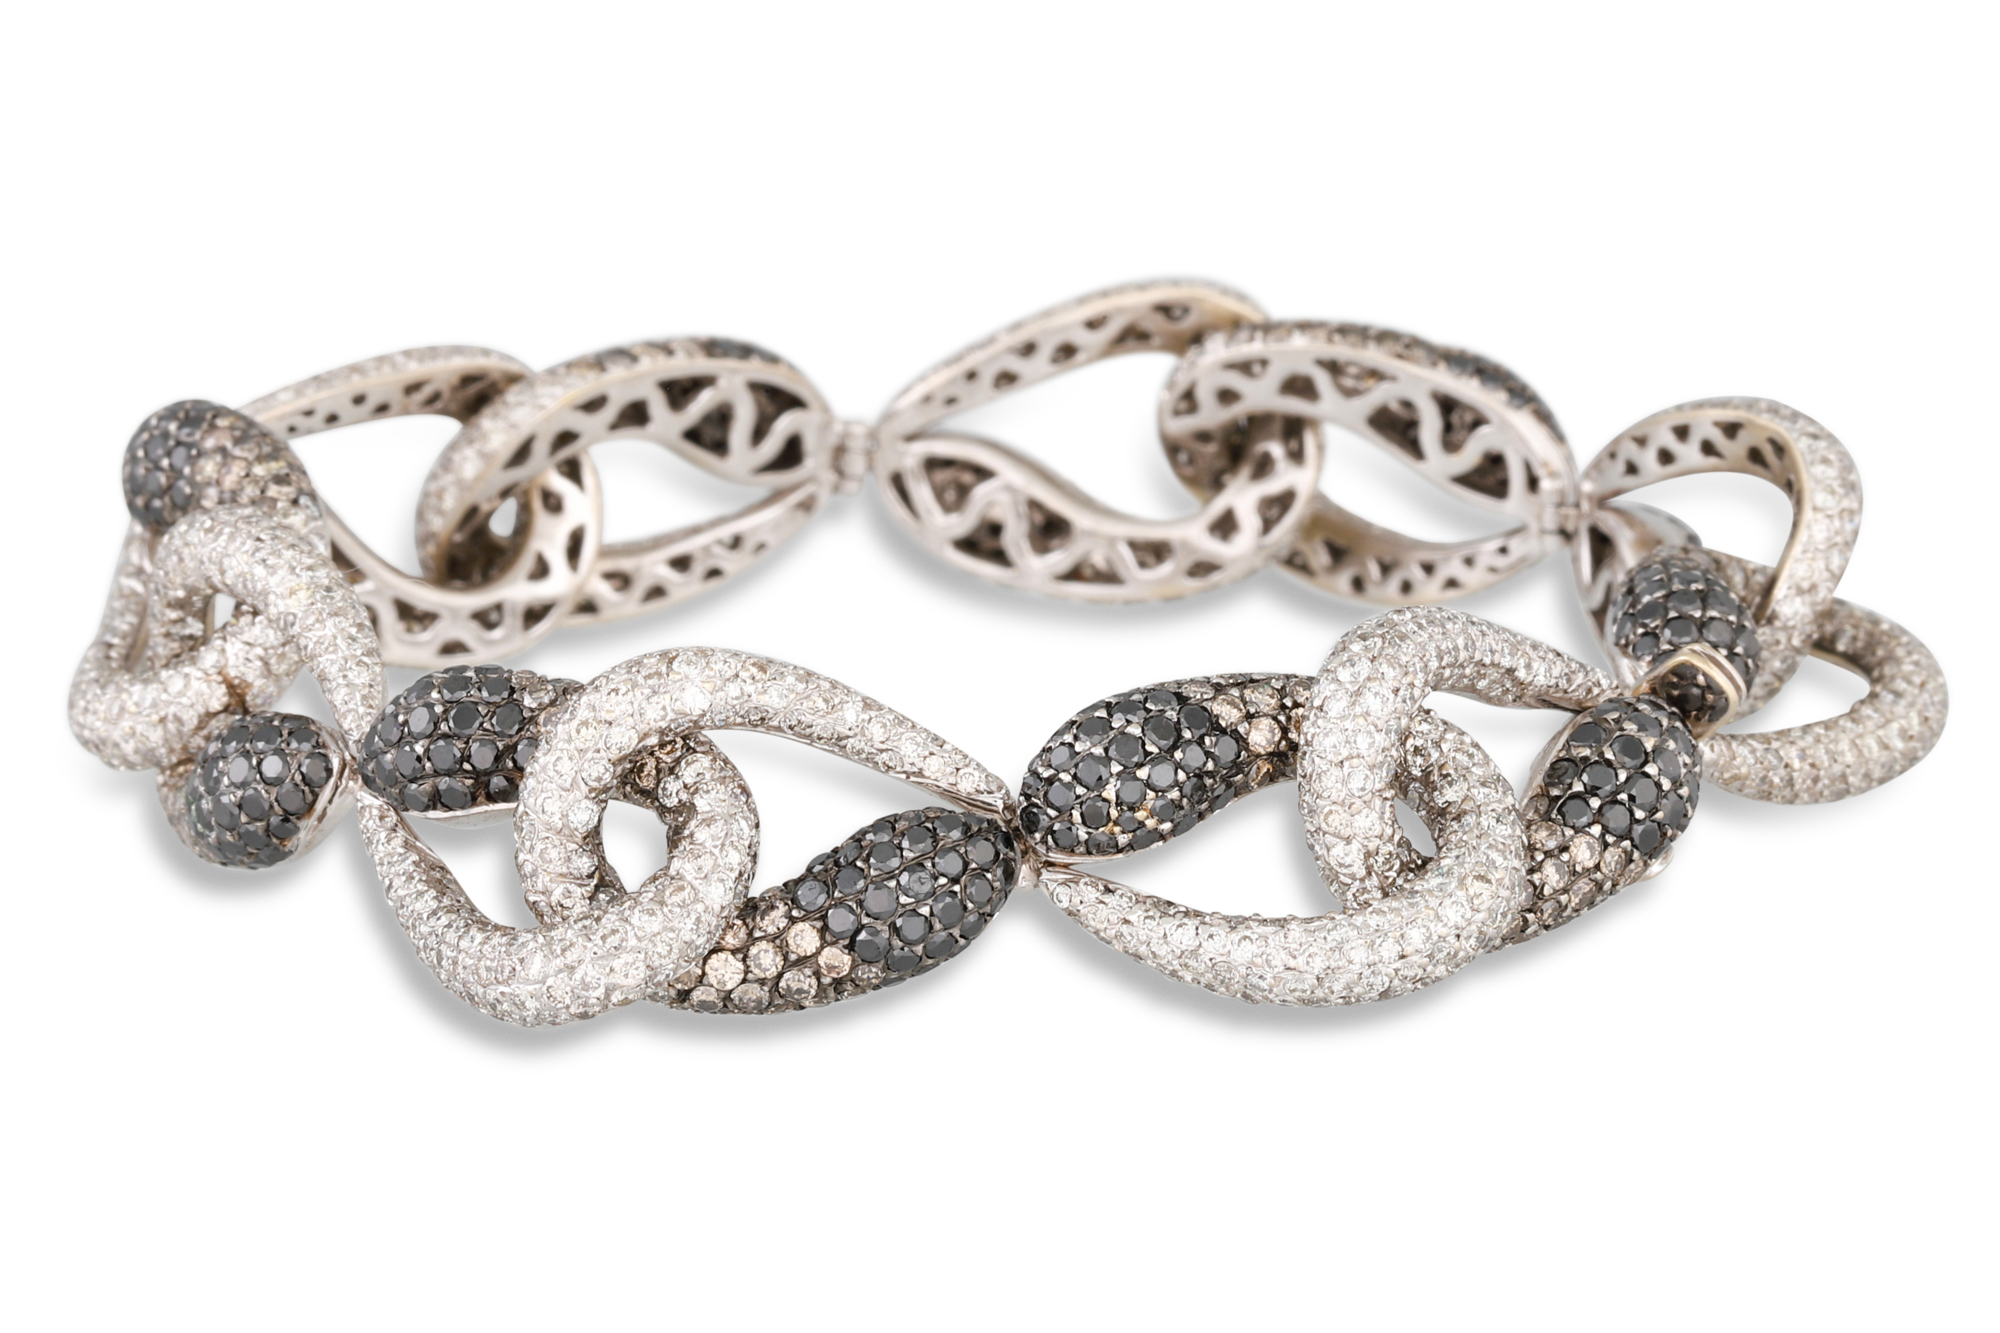 A DIAMOND SNAKE BRACELET, mounted in 18ct gold. Estimated: weight of diamonds: 3.00 ct